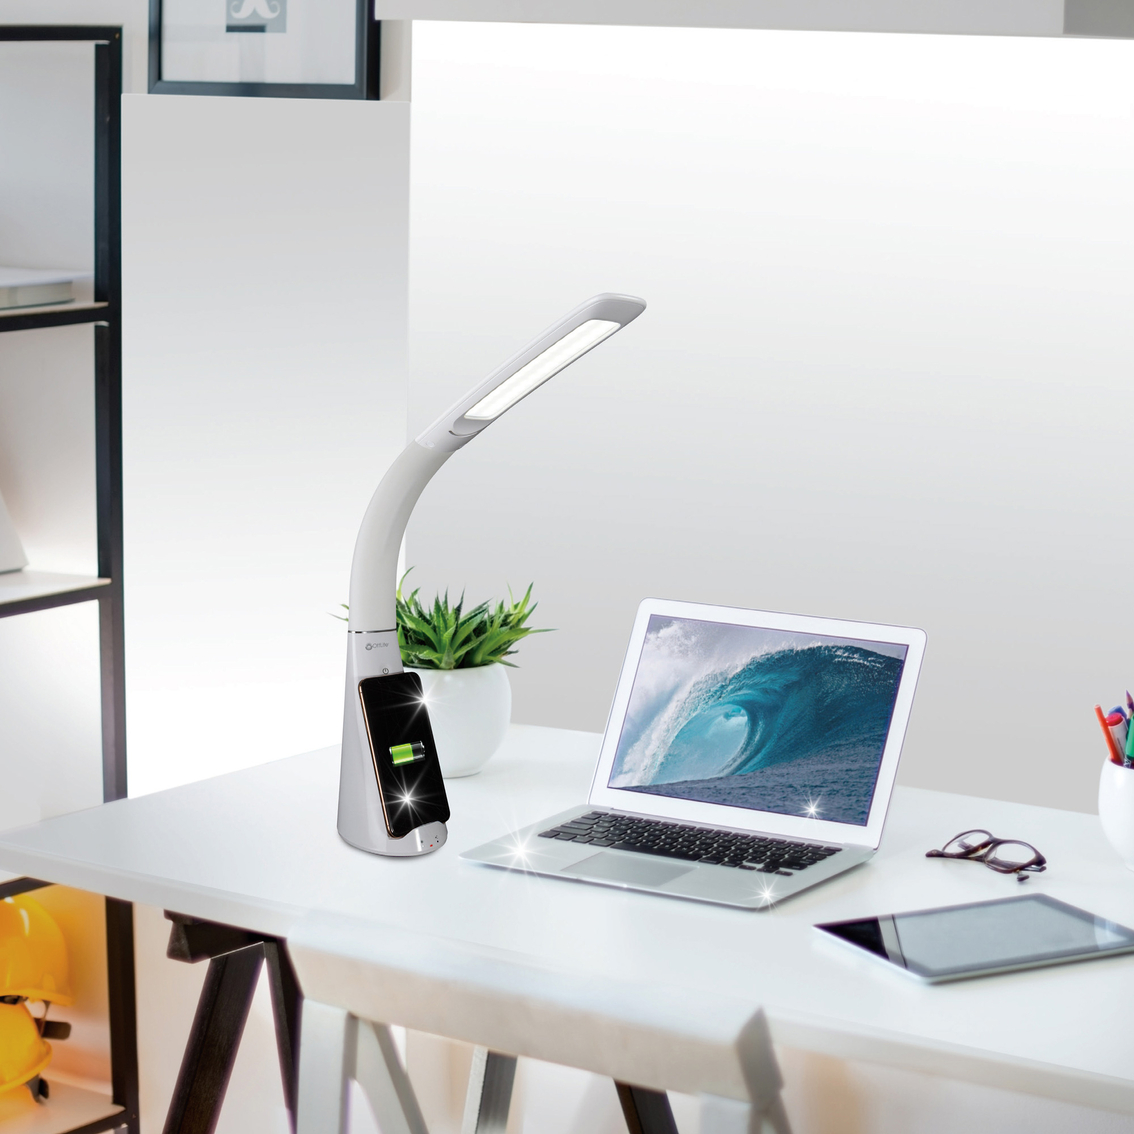 OttLite Purify 26 in. Adjustable LED Sanitizing Desk Lamp with Wireless Charging - Image 7 of 9